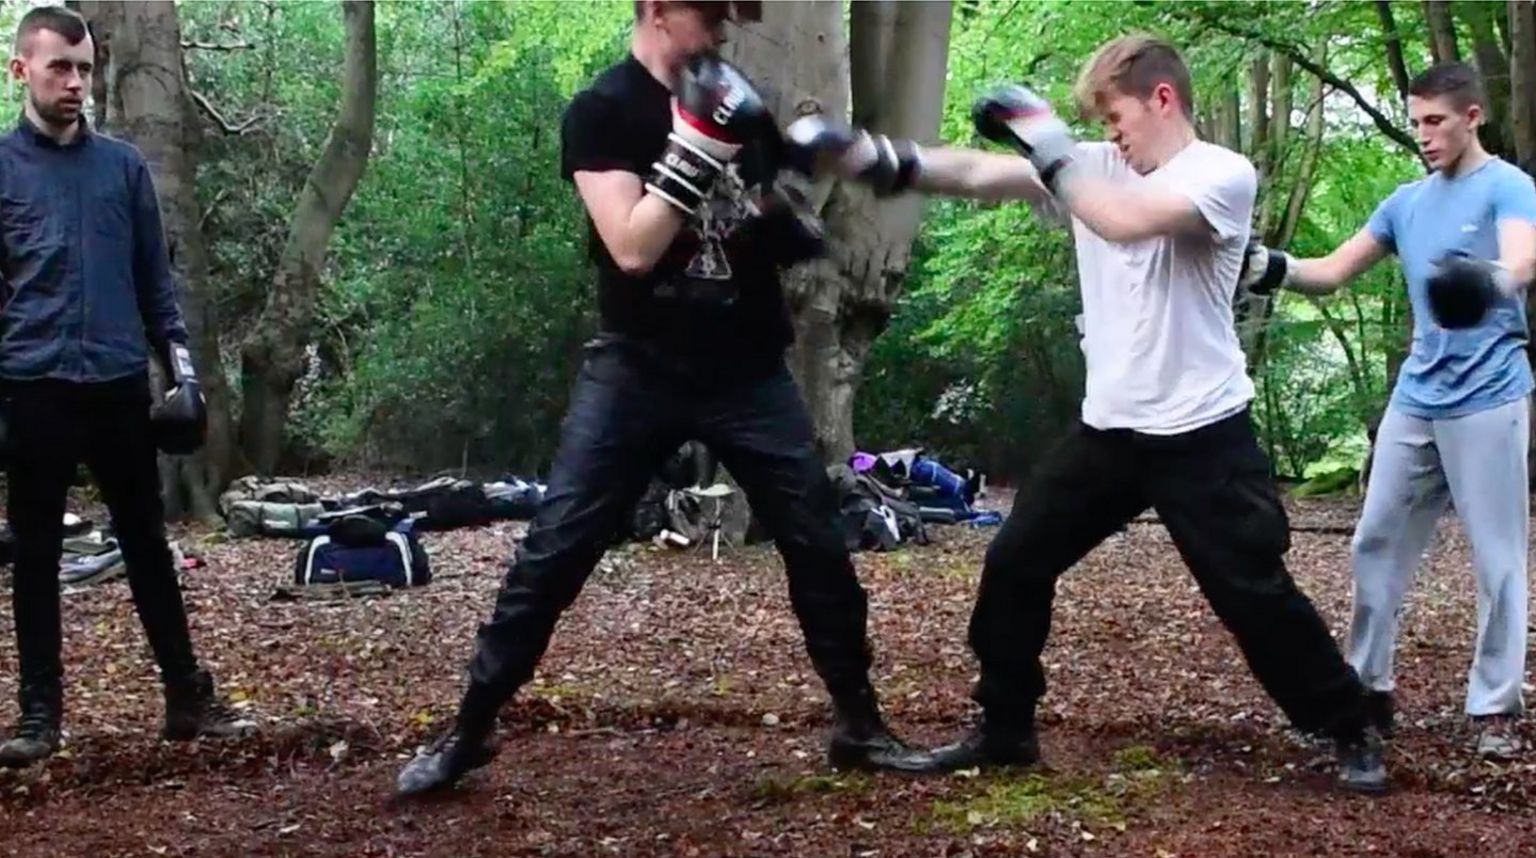 Hannam (in white) sparring with Oskar Dunn-Koczorowski, watched by National Action co-founder Alex Davies in the blue shirt.